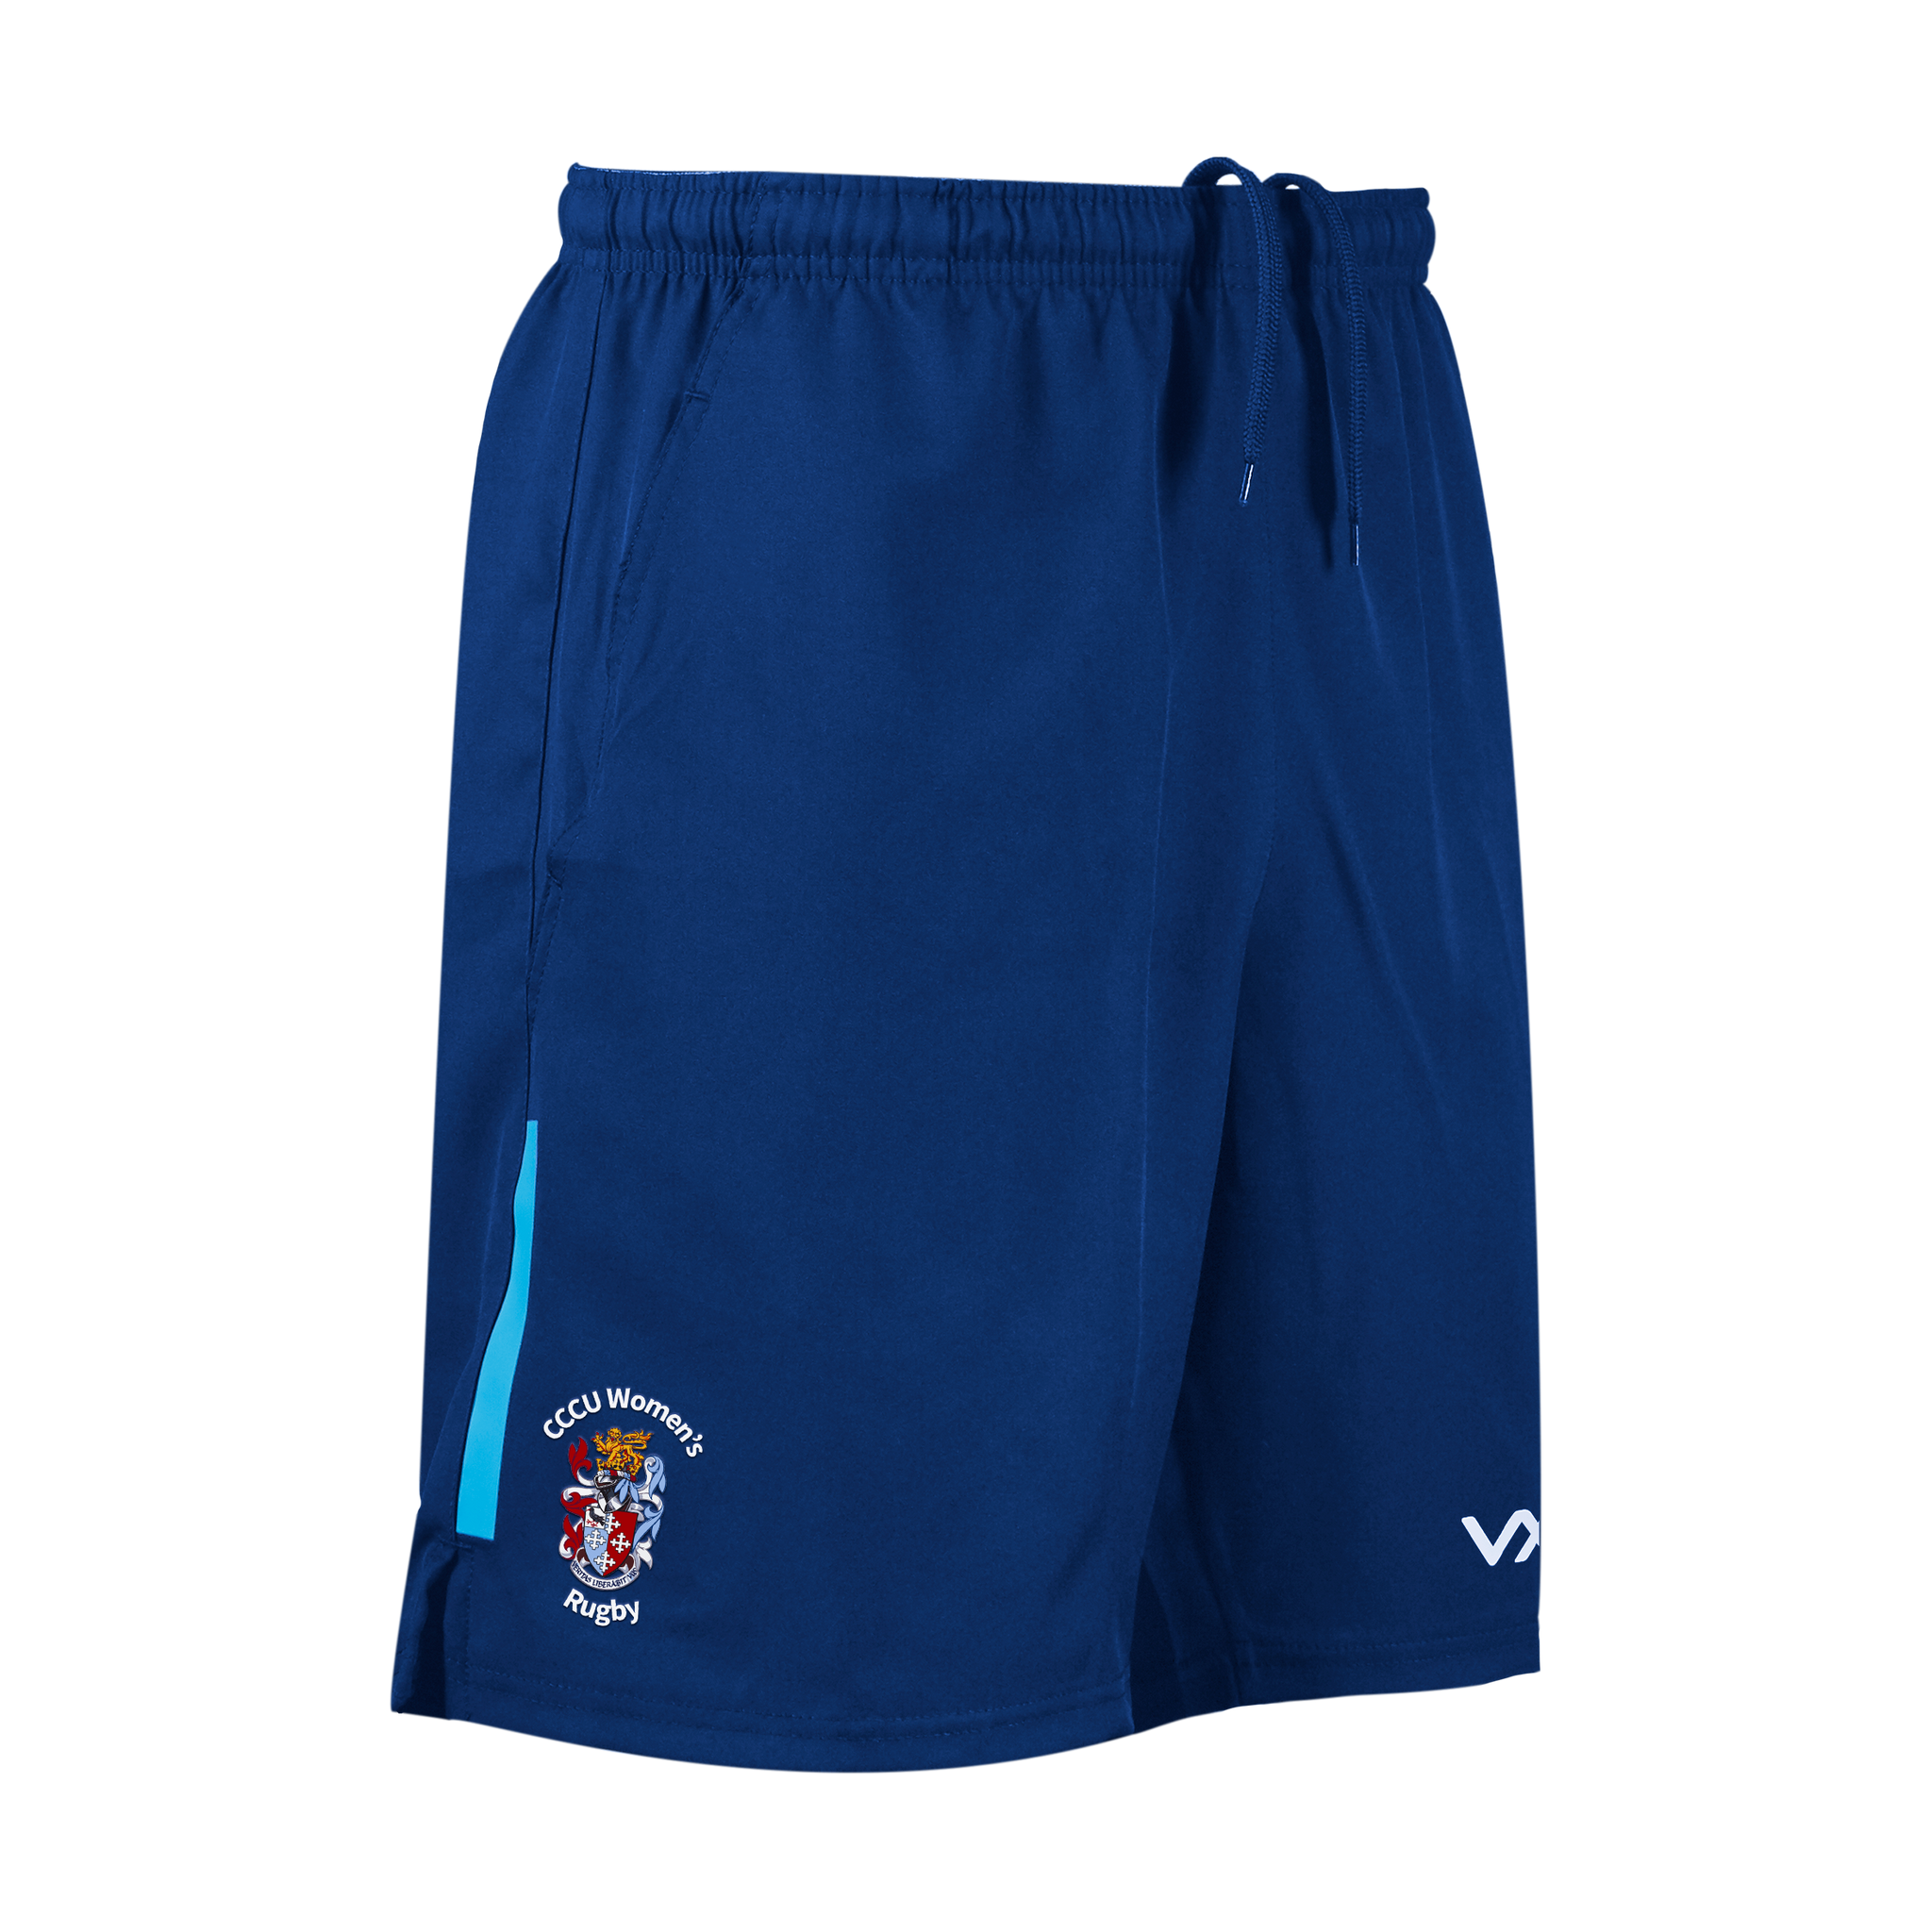 Canterbury Christ Church University Women's Rugby Fortis Youth Travel Shorts